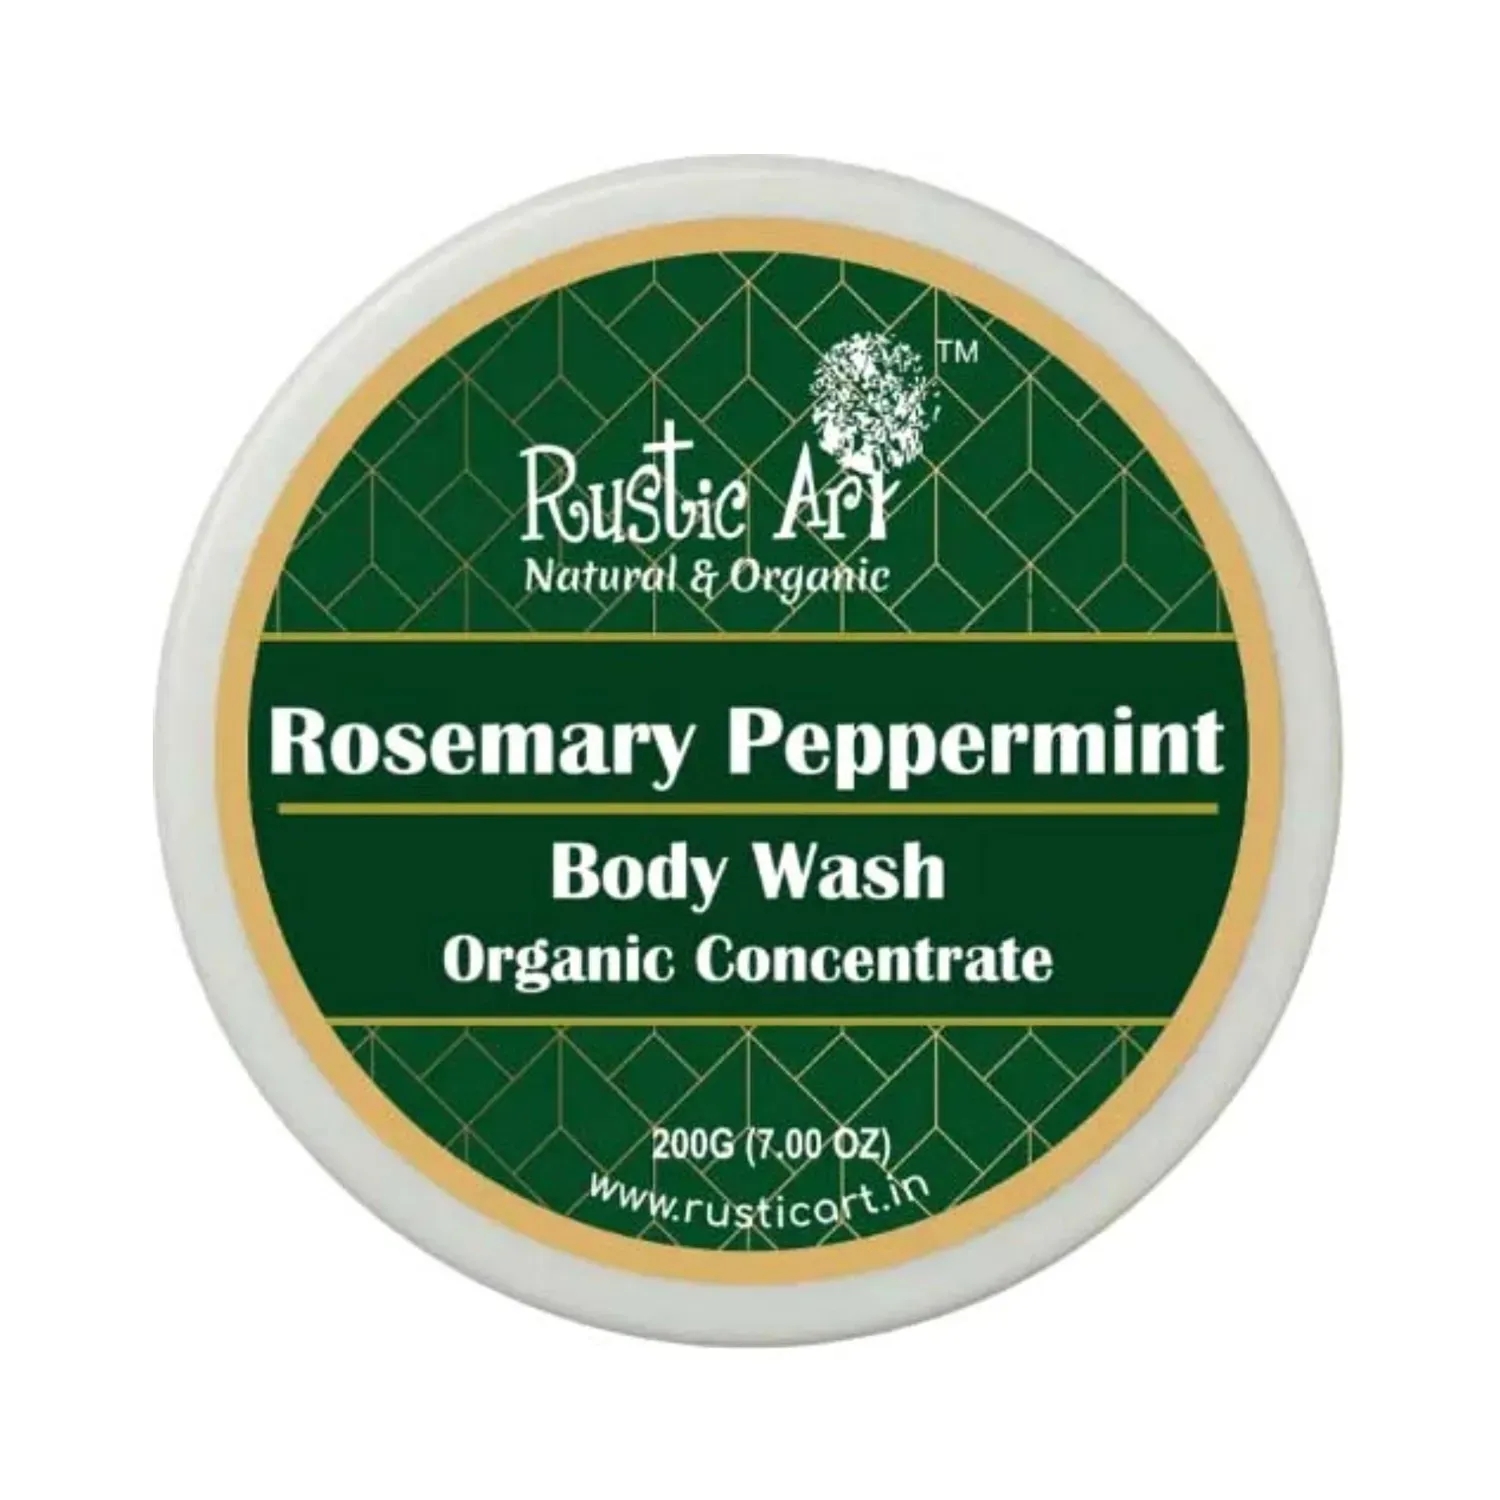 Rustic Art Organic Concentrate Rosemary Peppermint Body Wash (200g)